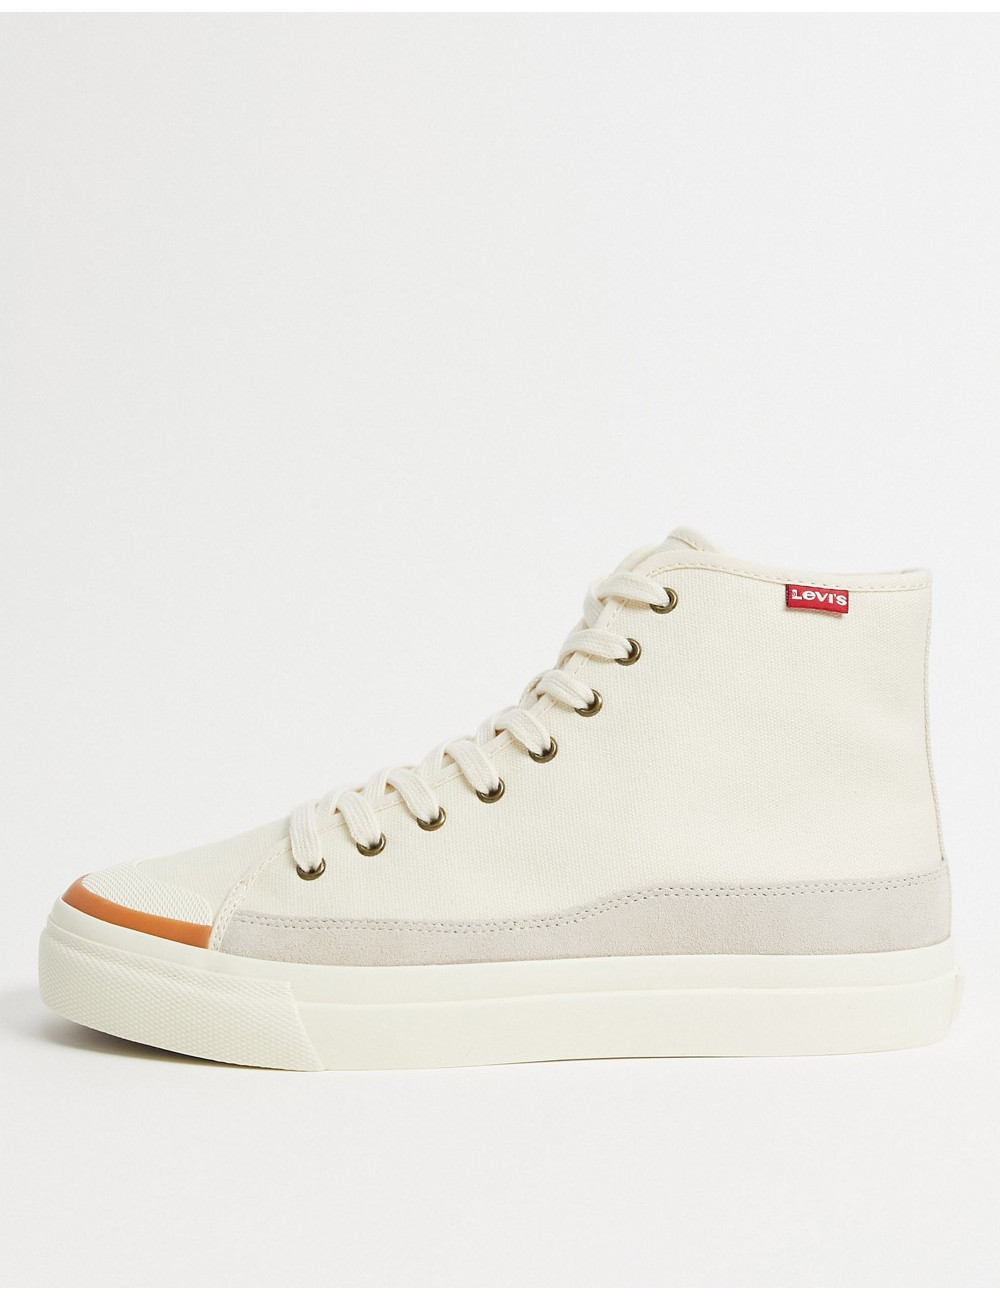 Levi's square high top...